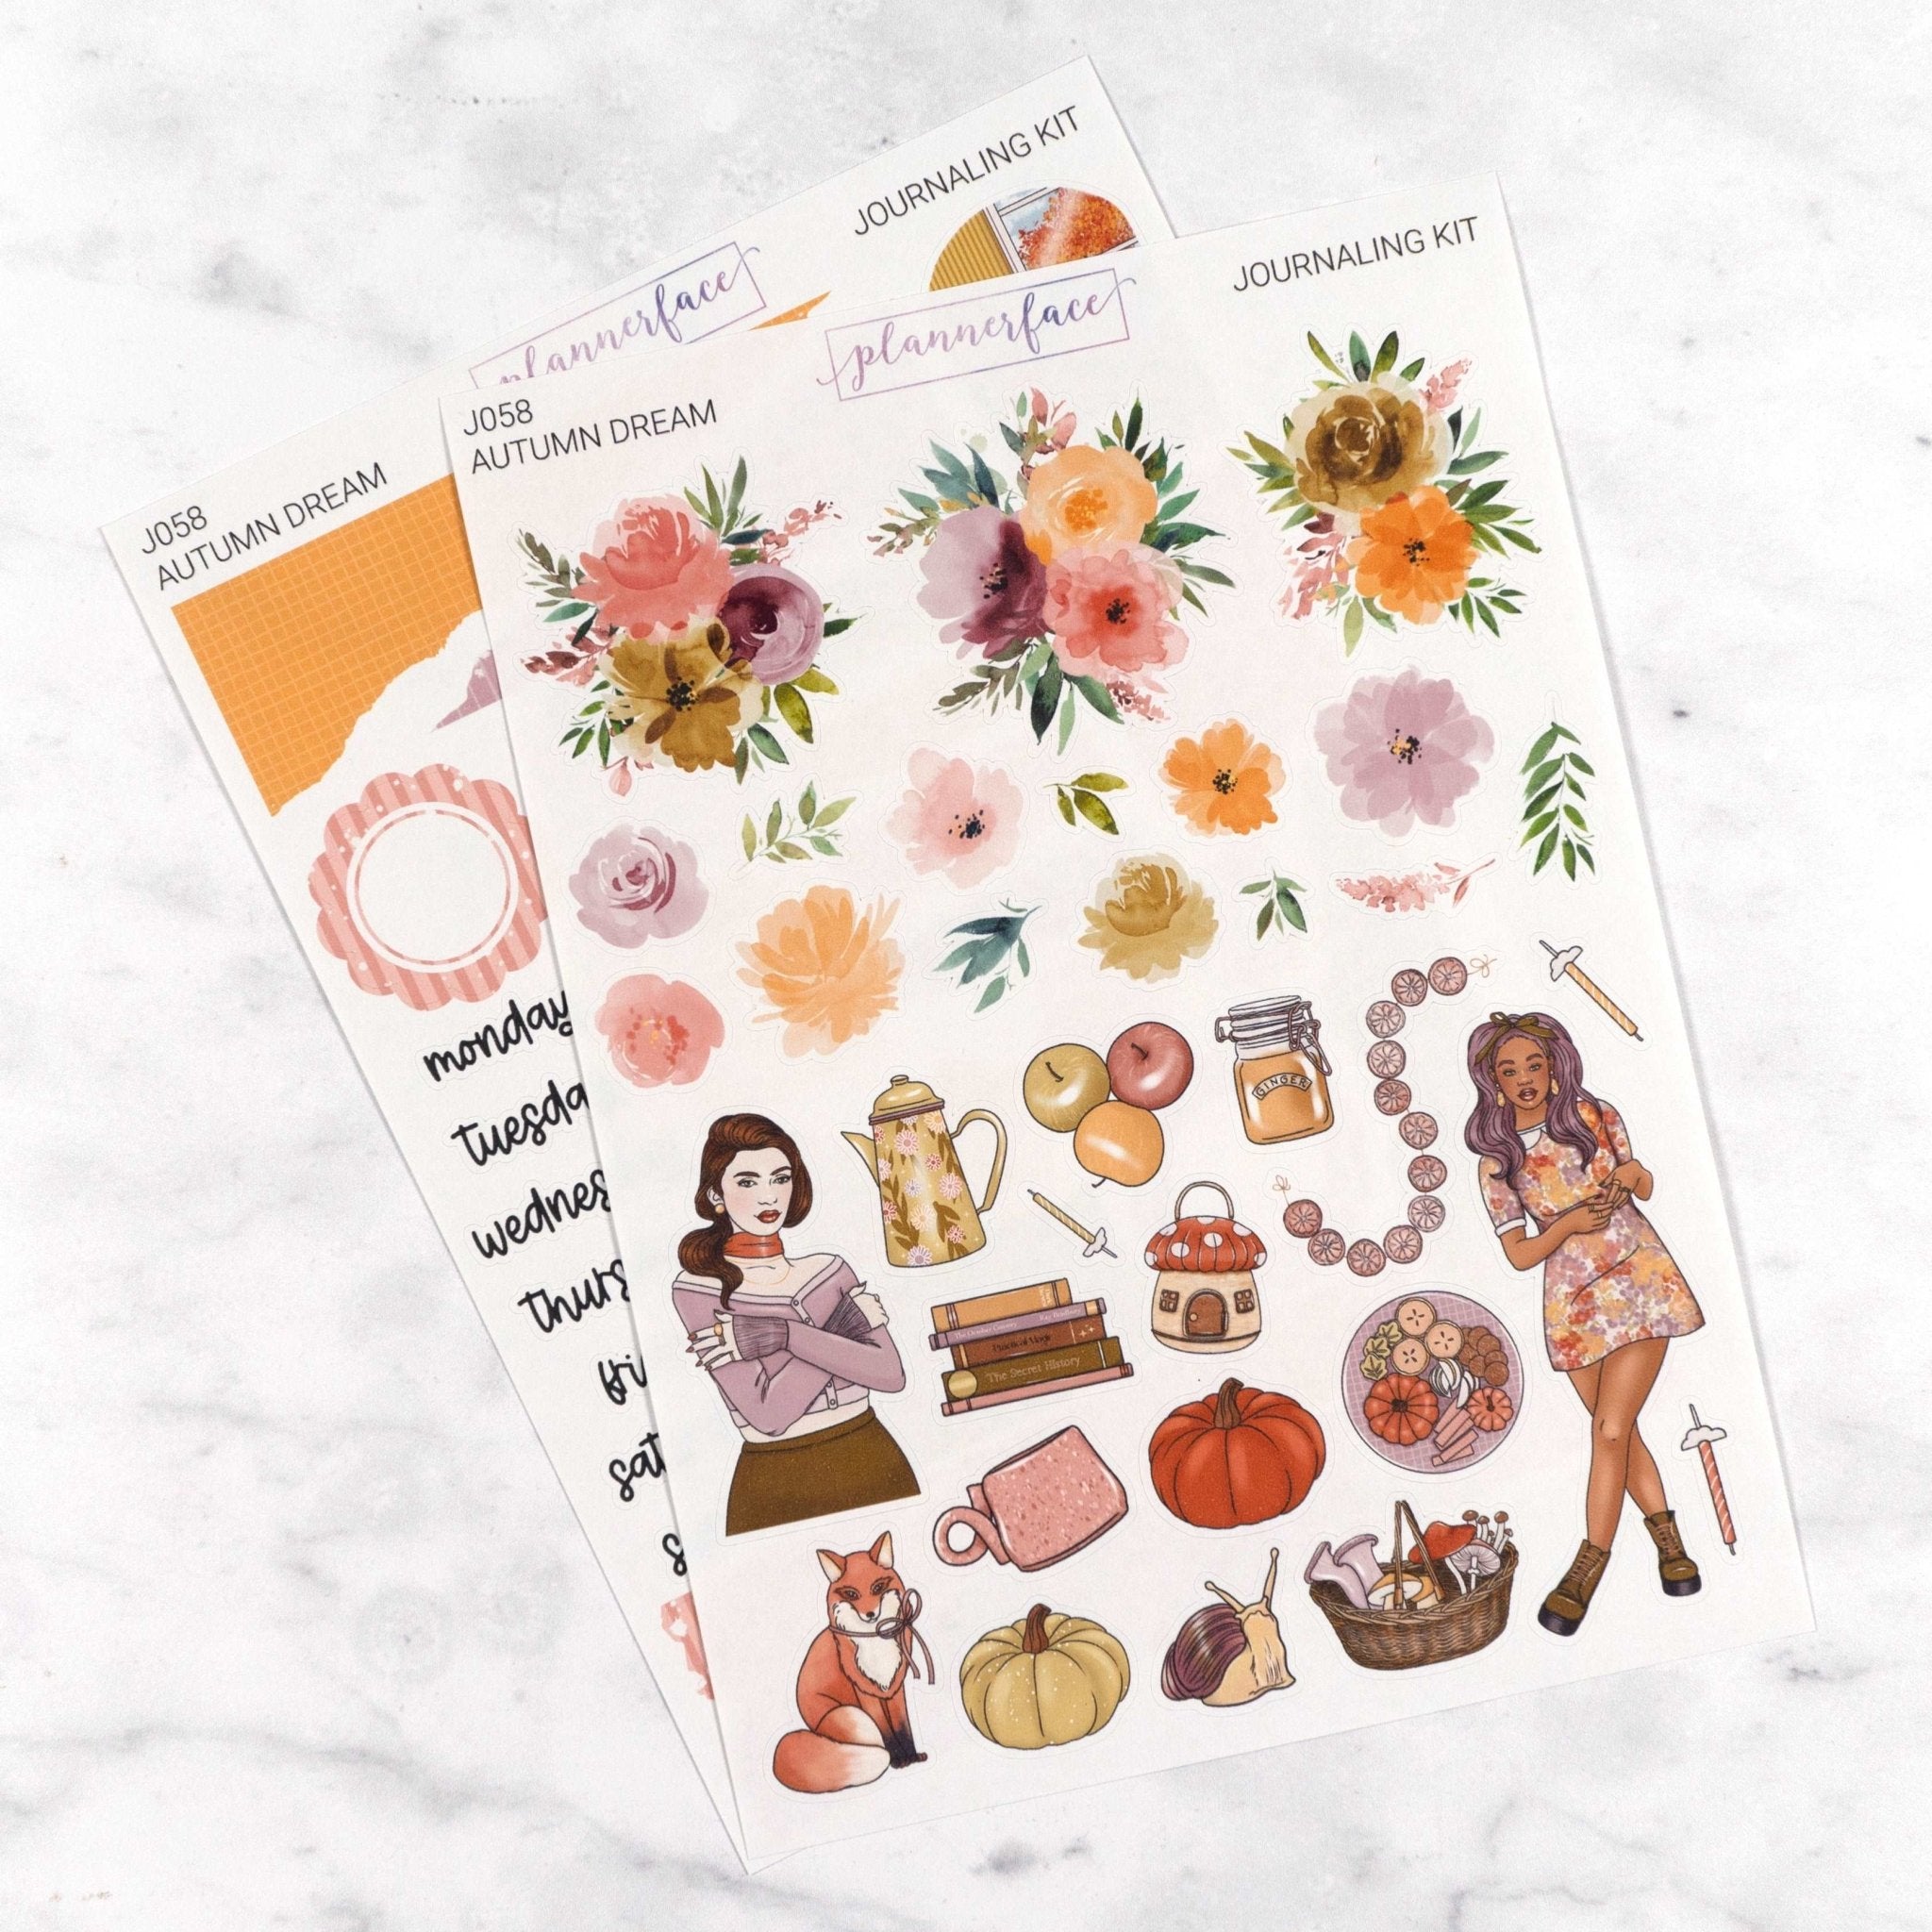 Autumn Dream | Journaling Kit by Plannerface